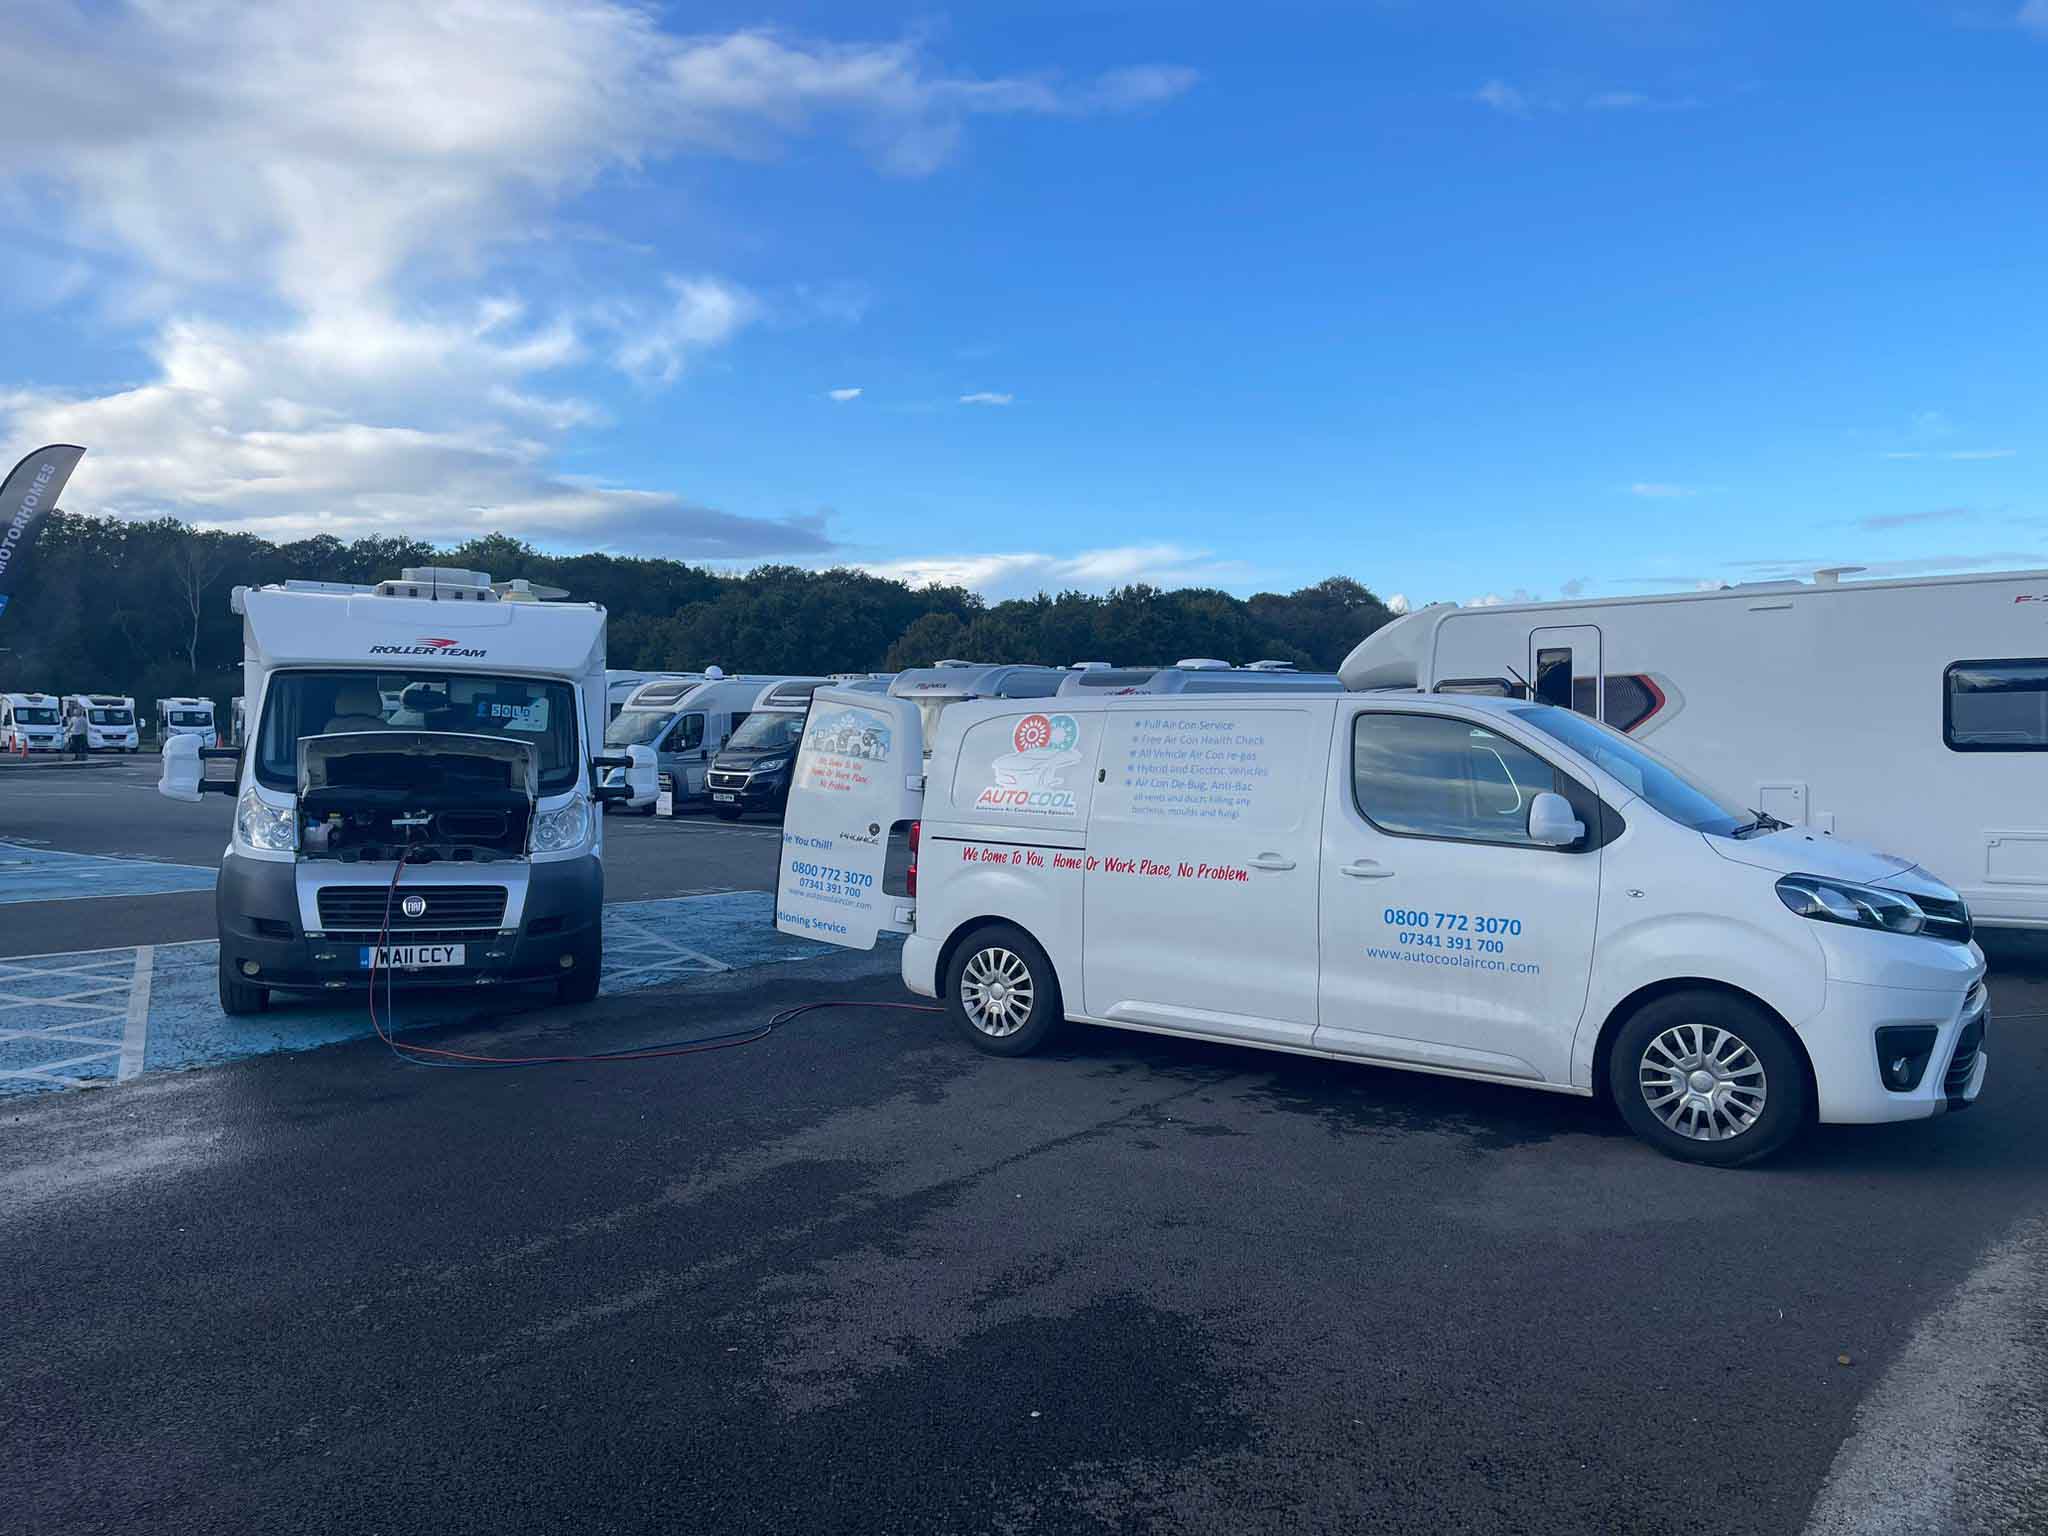 Autocool | Automotive Mobile Air Con and Ant Bac in Bromley and SE London | Mobile home regas